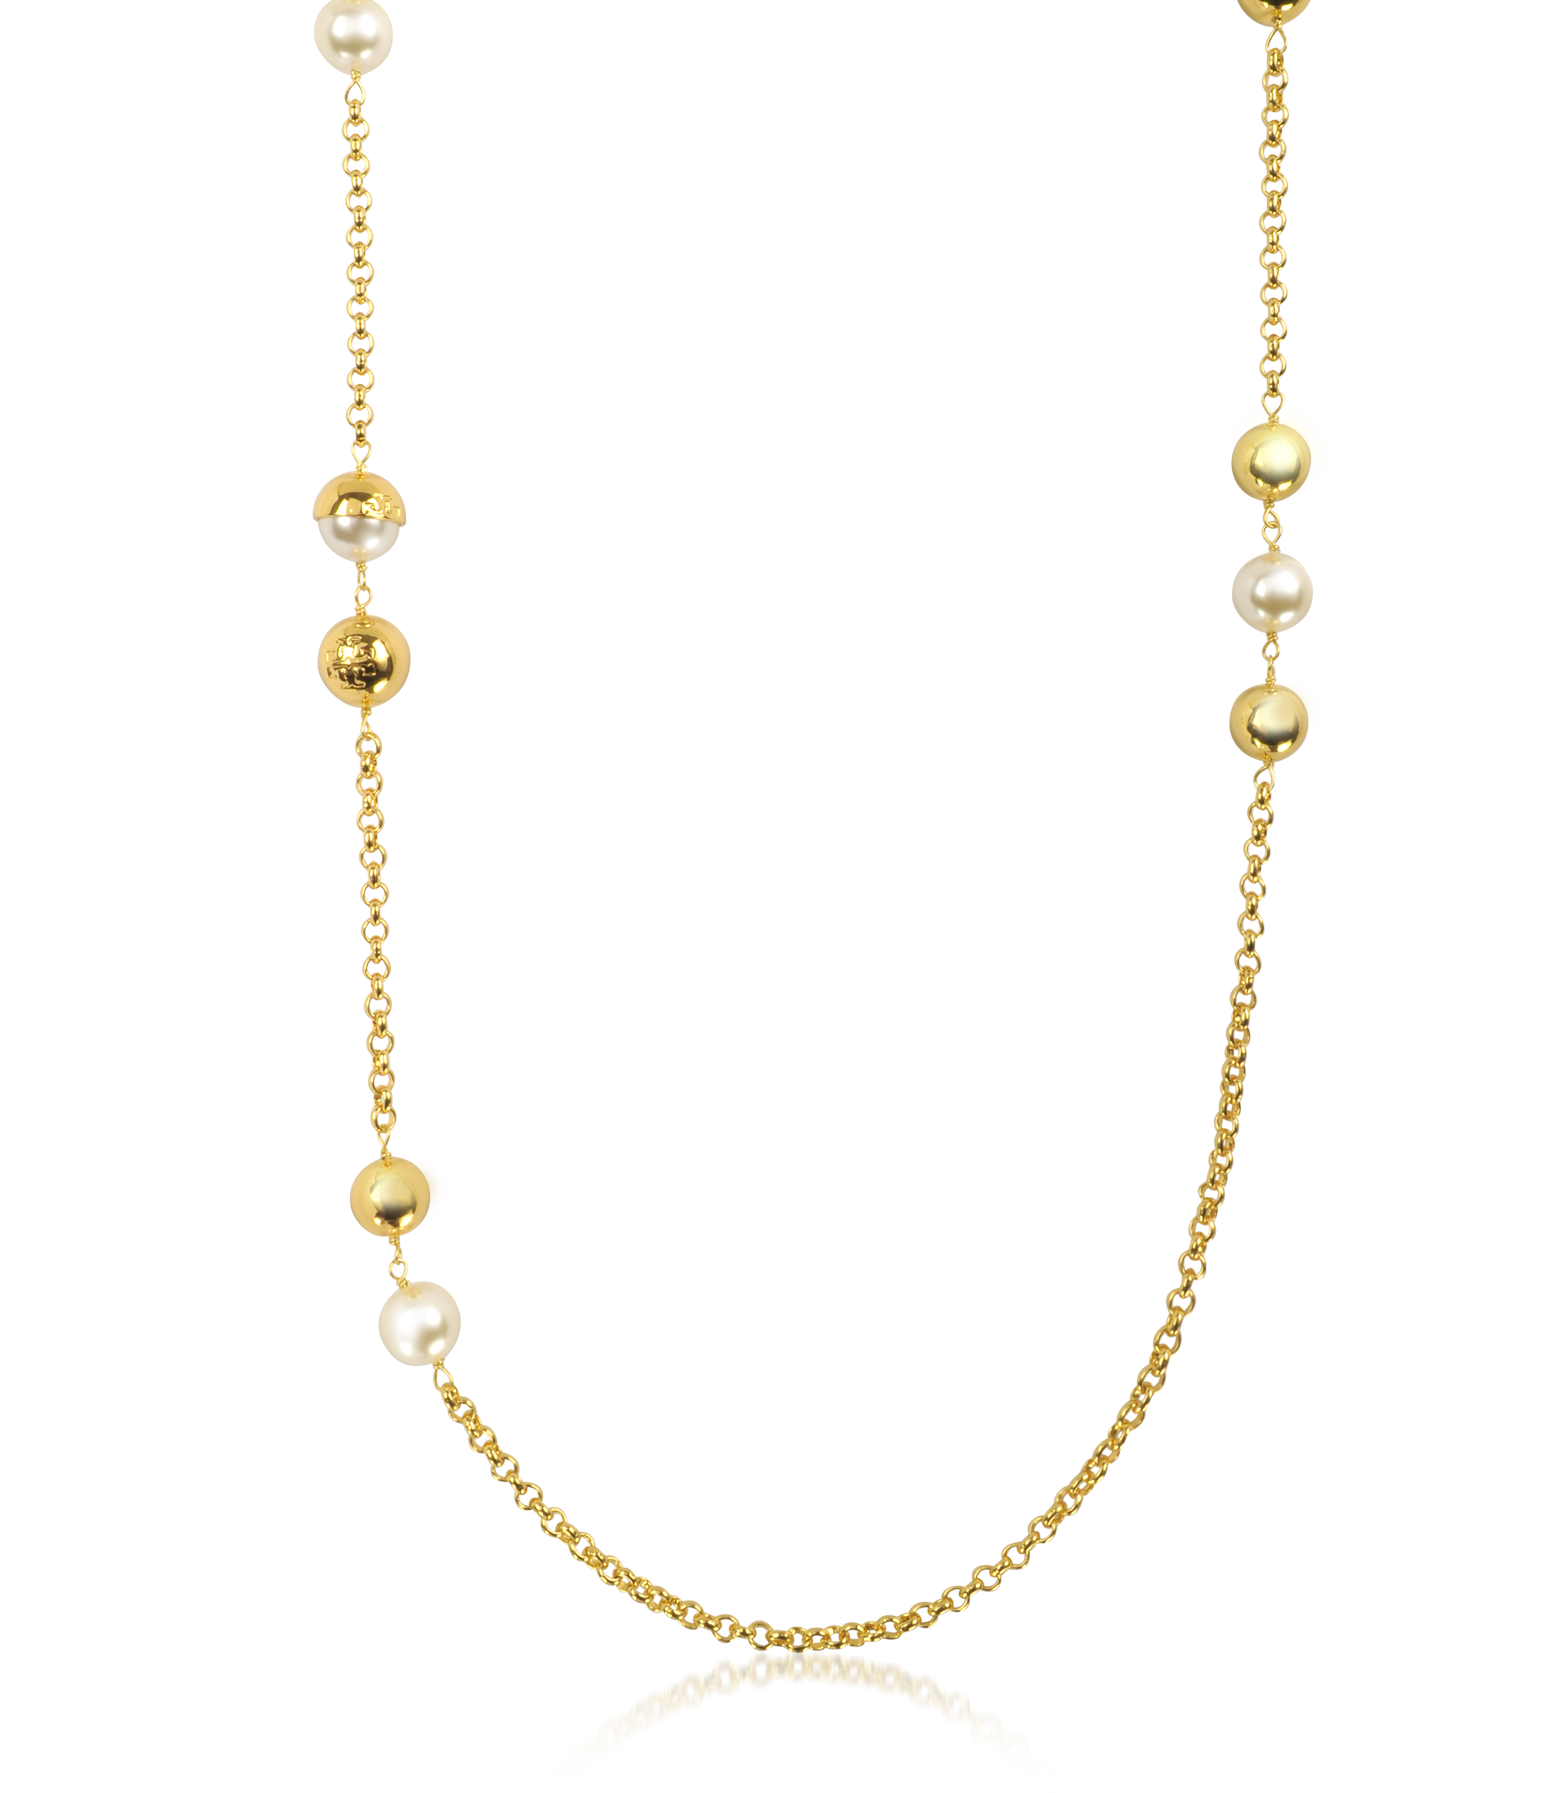 Tory Burch Capped Crystal Pearl Chain Rosary Necklace - FORZIERI